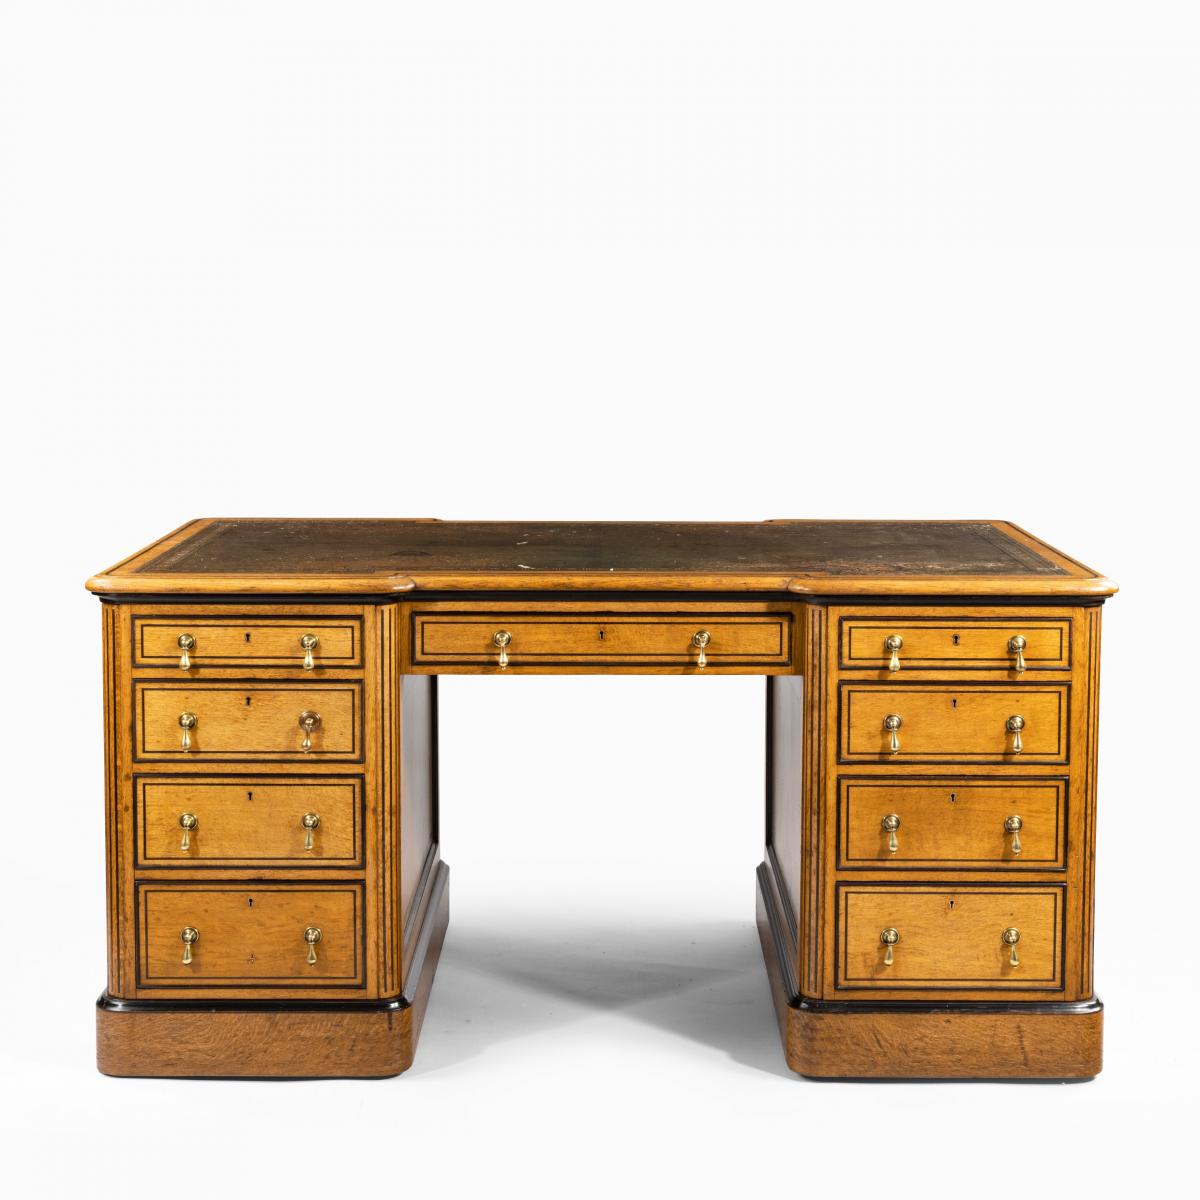 Victorian oak and ebony partner’s desk, attributed to Holland and Son (England, 1880)